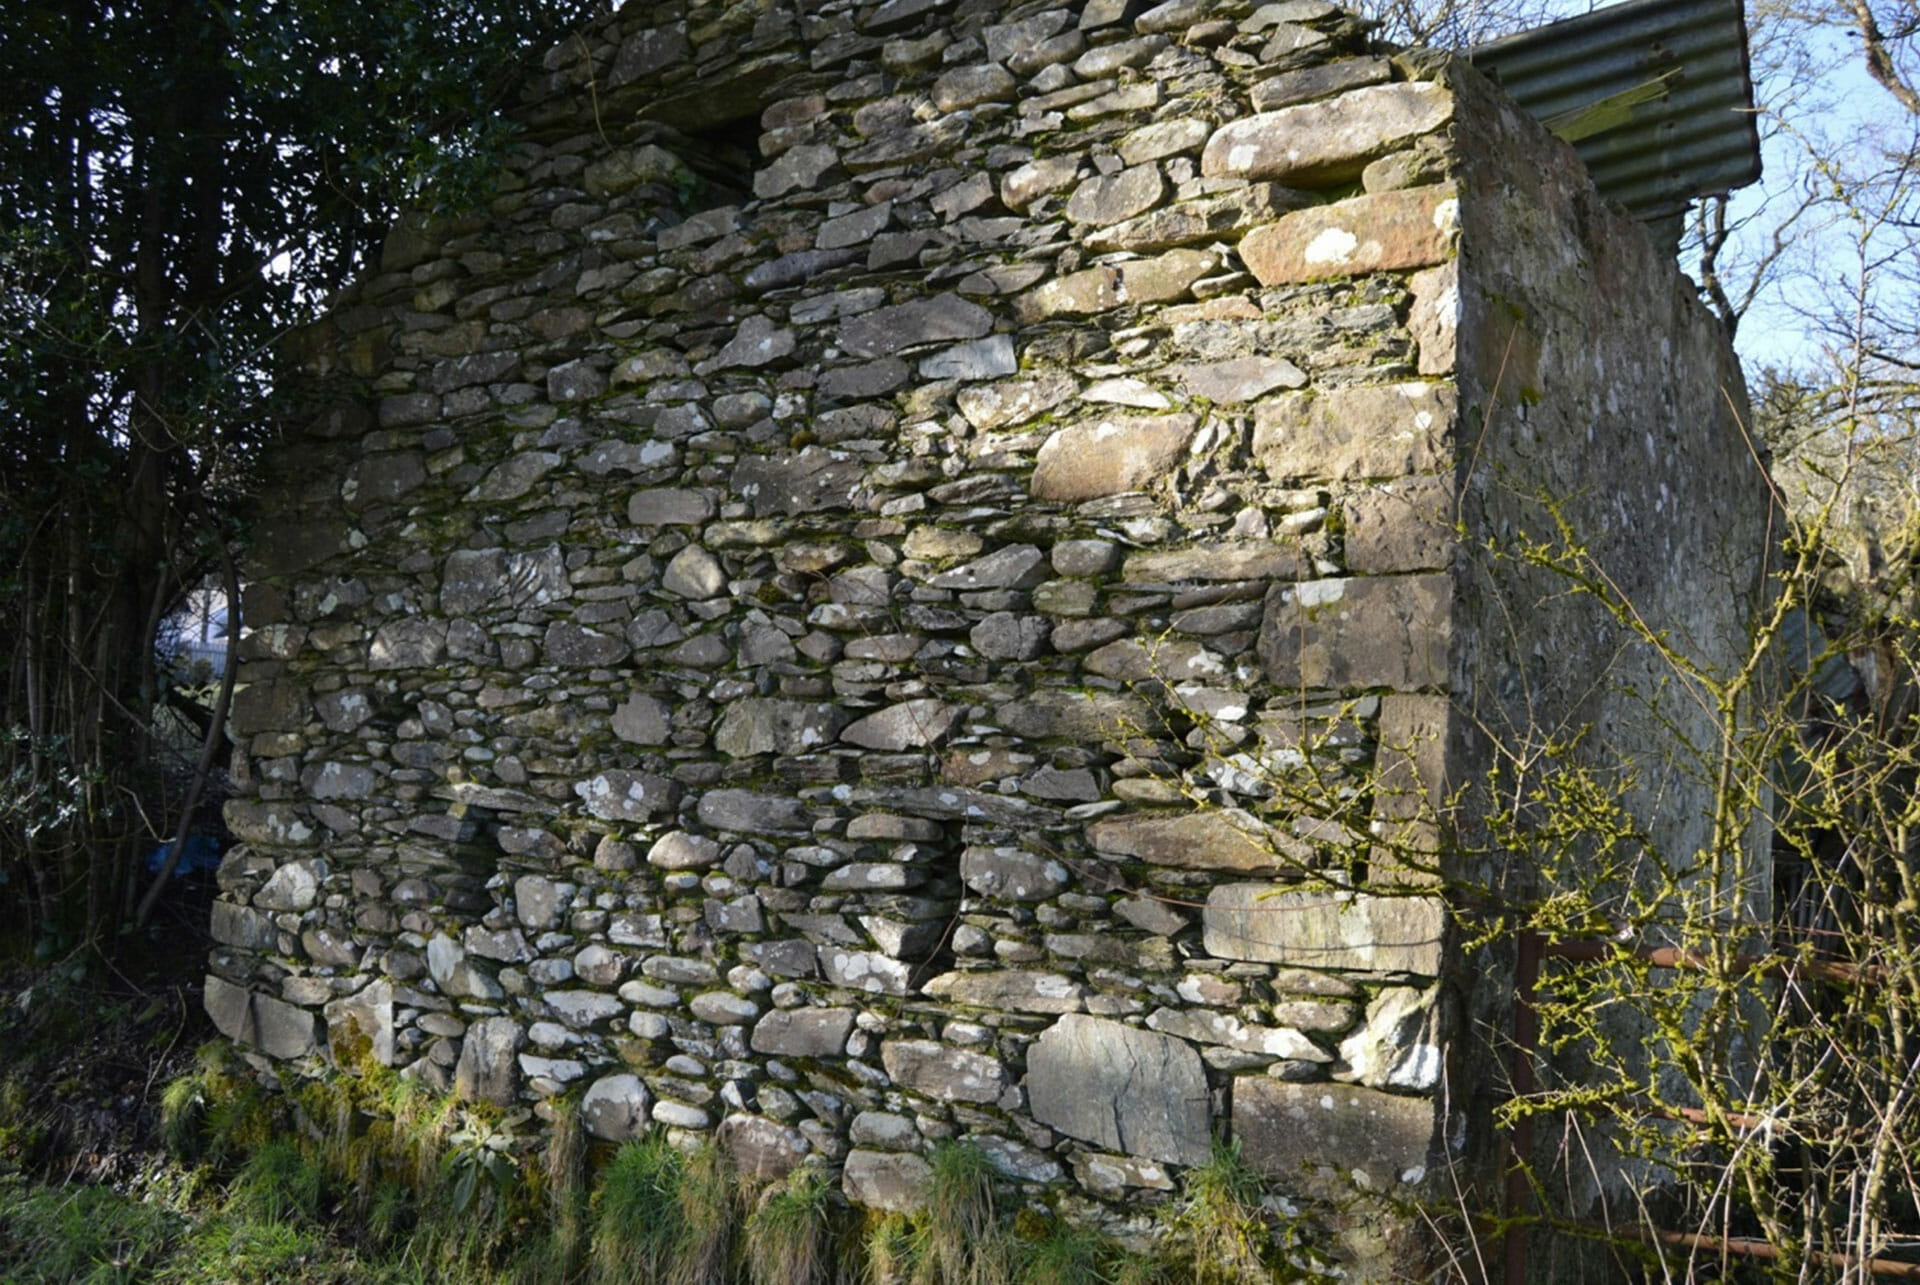 The turf shed gable with its skilful stonework